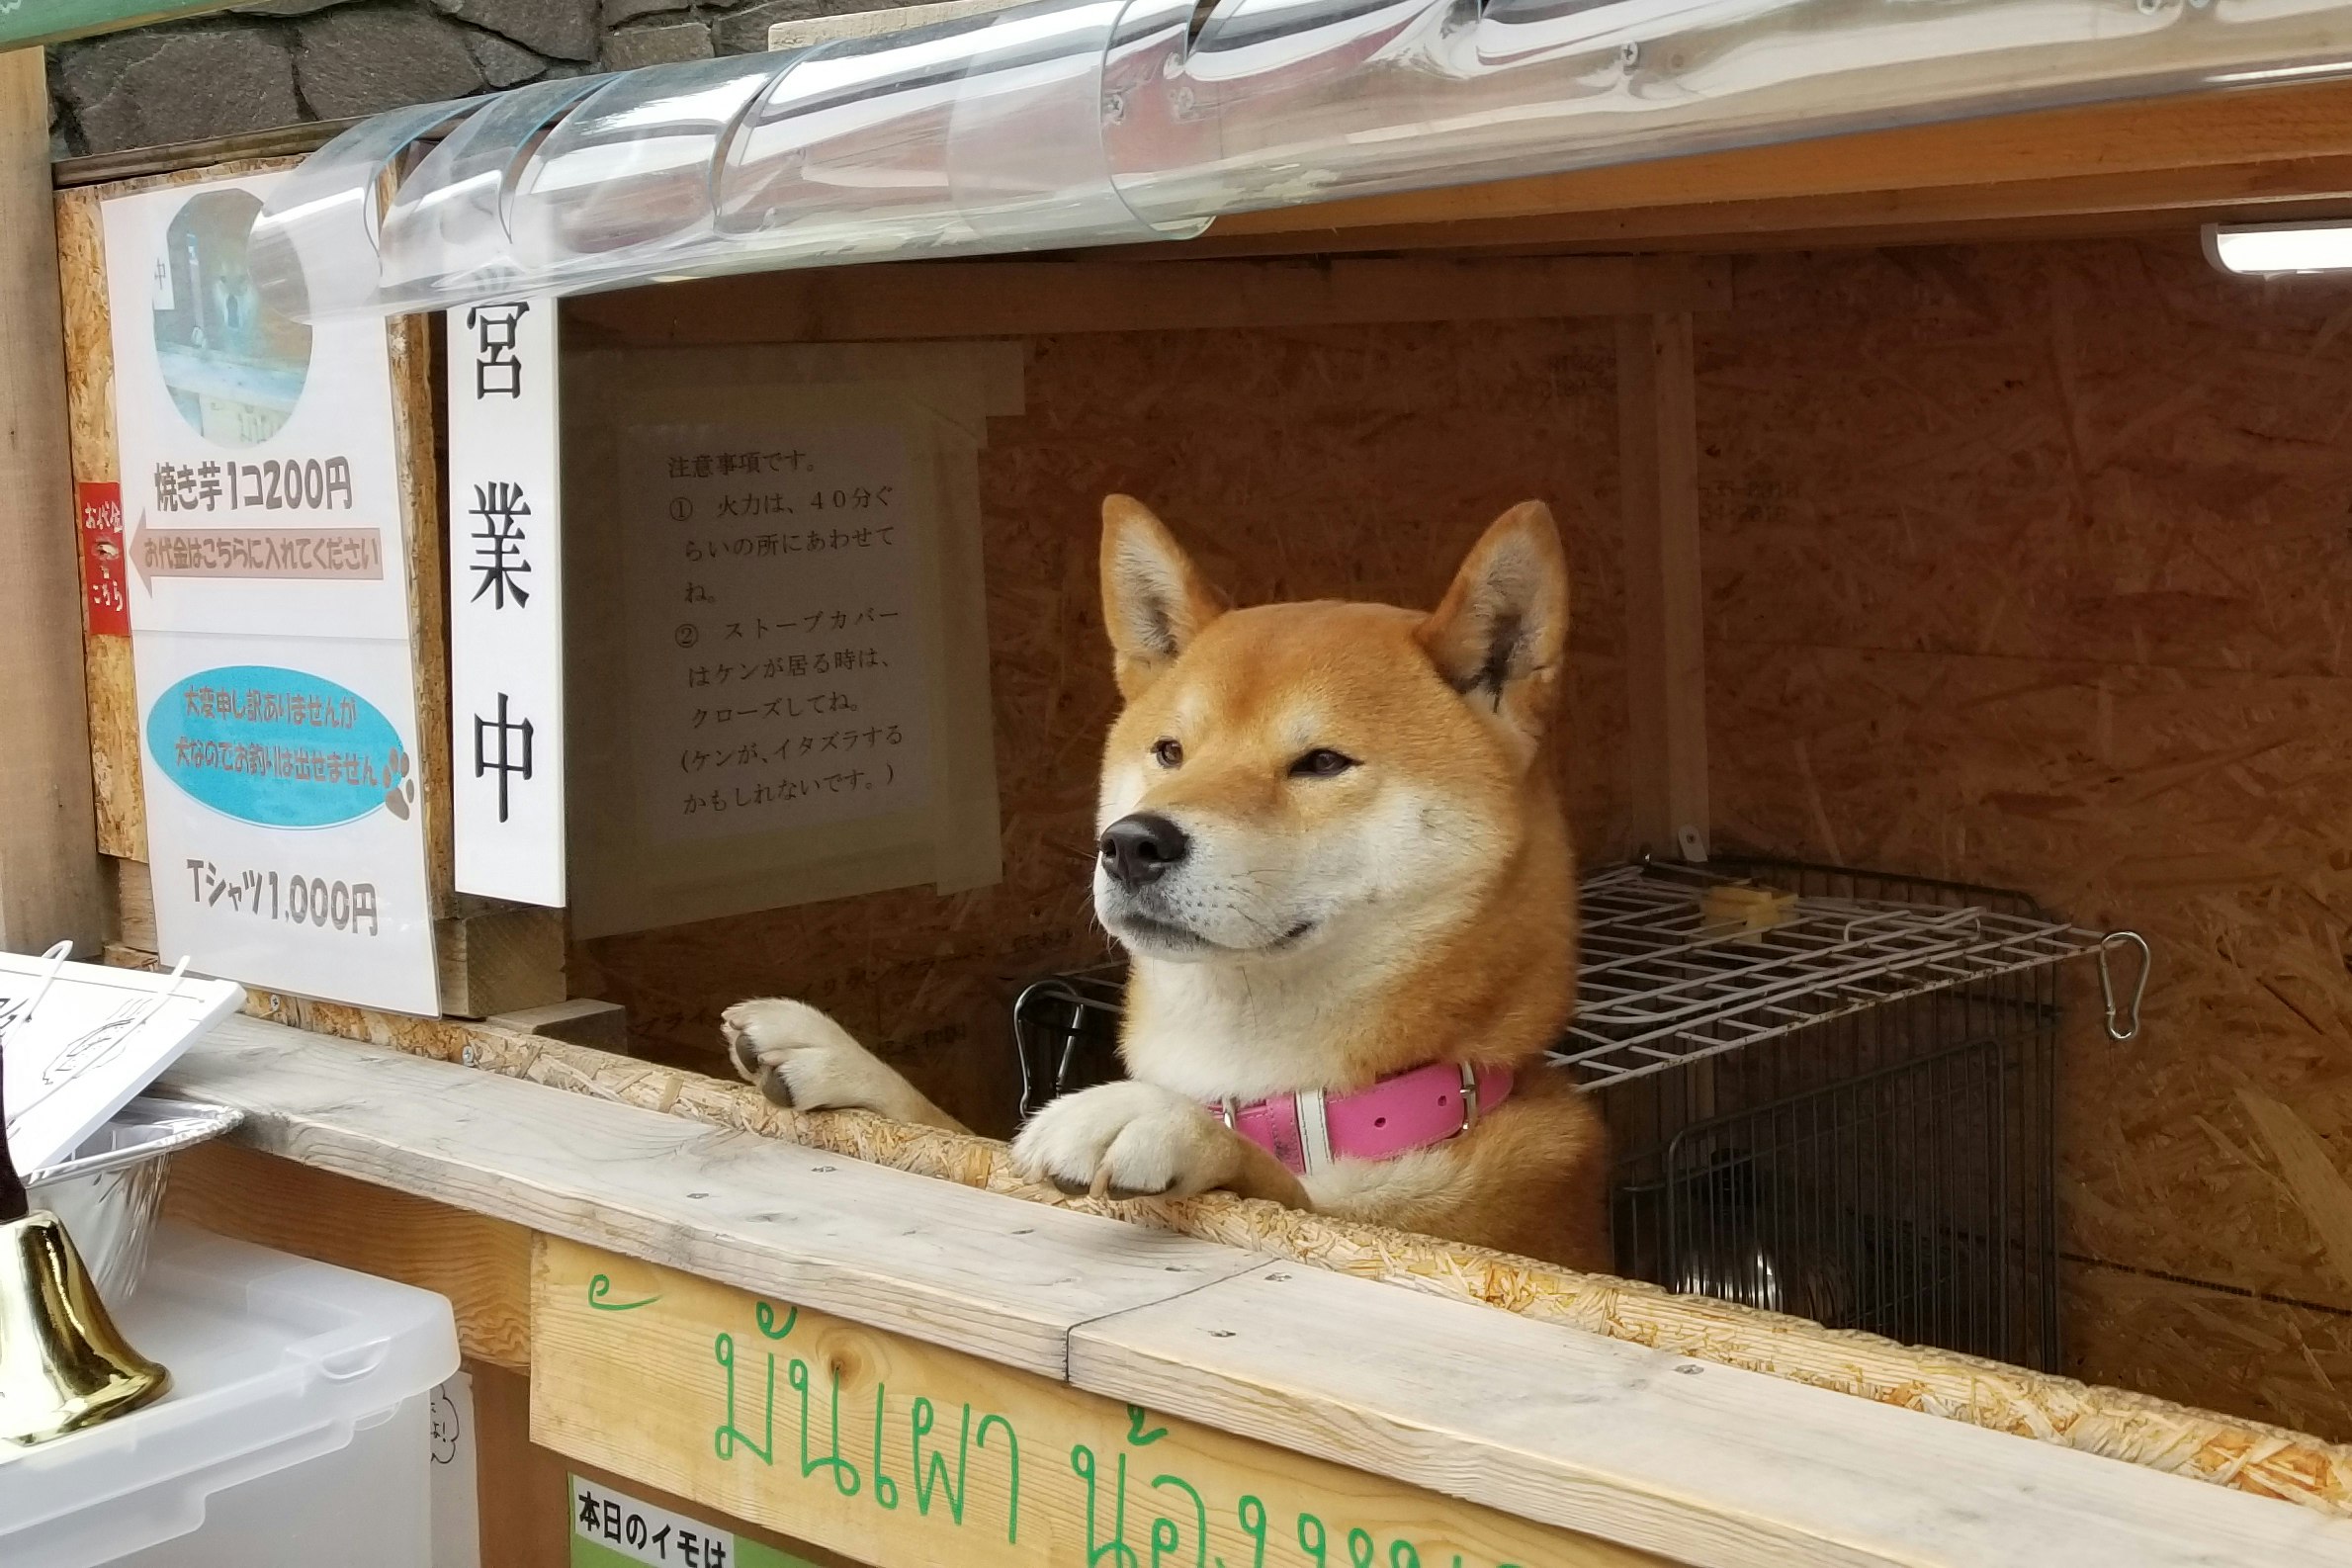 A shiba inu stands with his paws on a table, surrounded by a wooden stand